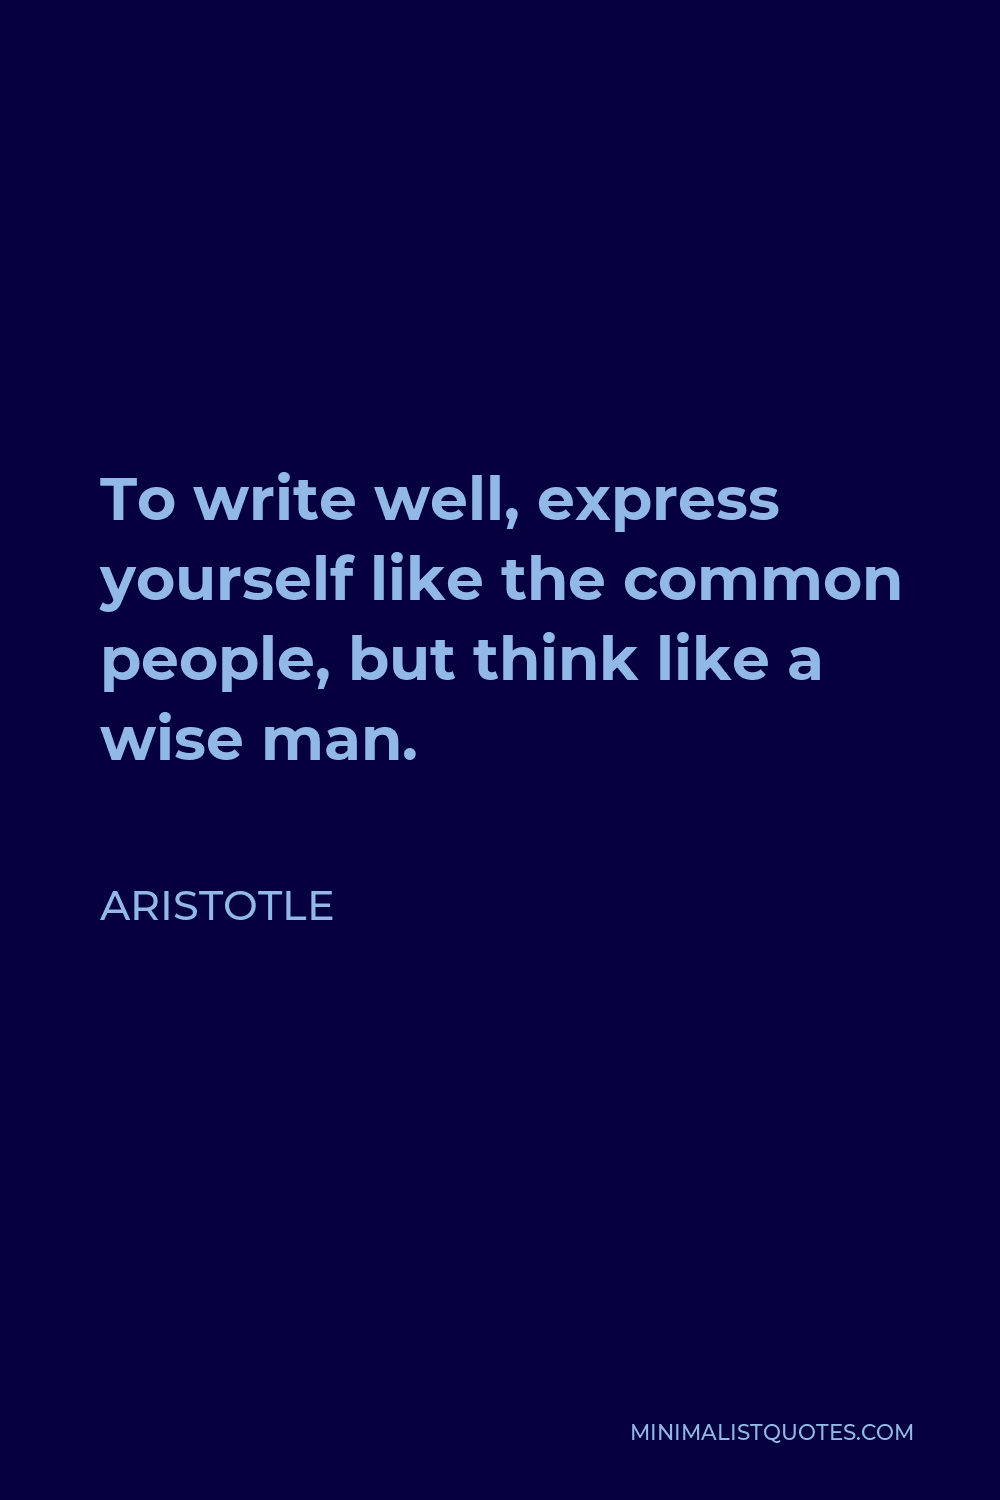 Aristotle Quote - To write well, express yourself like the common people, but think like a wise man.